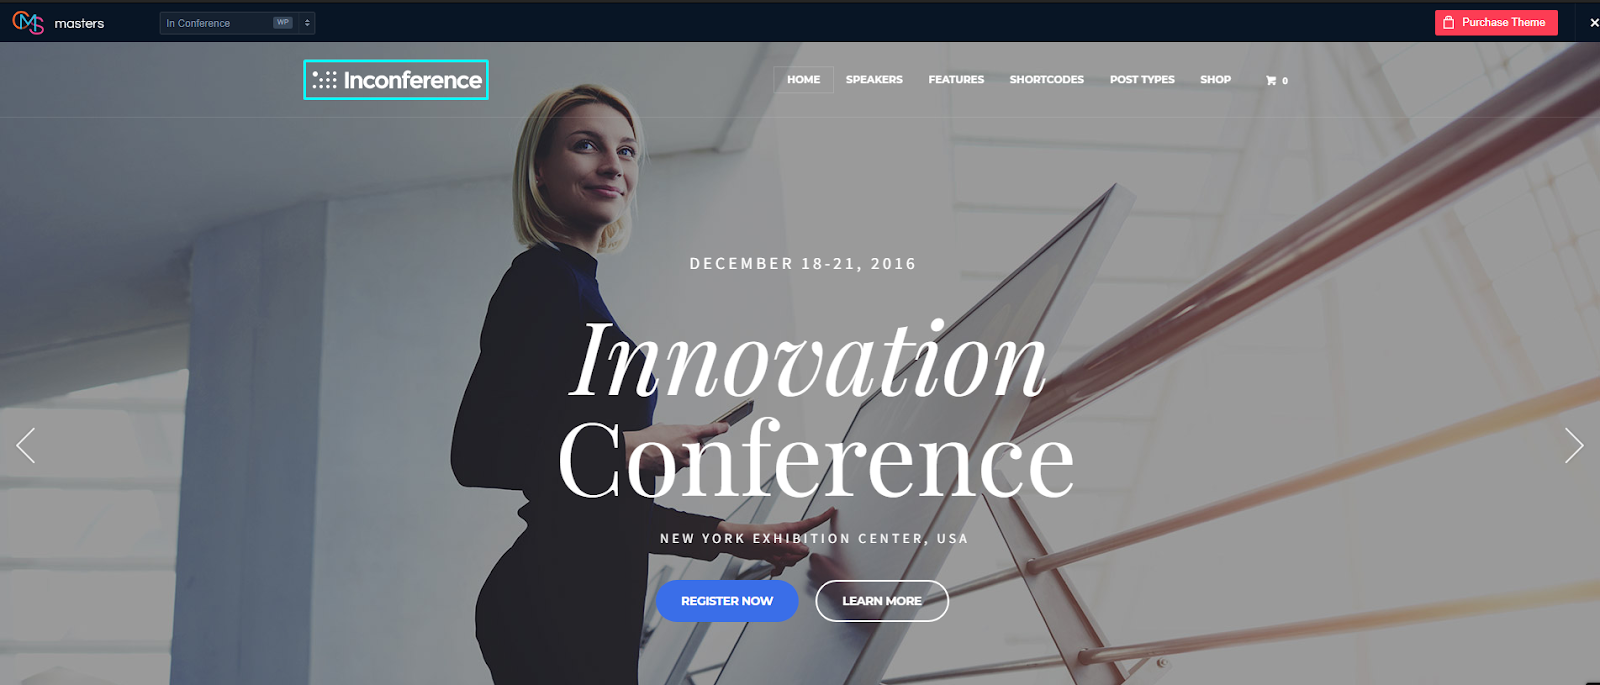 In Conference - Business Event WordPress Theme